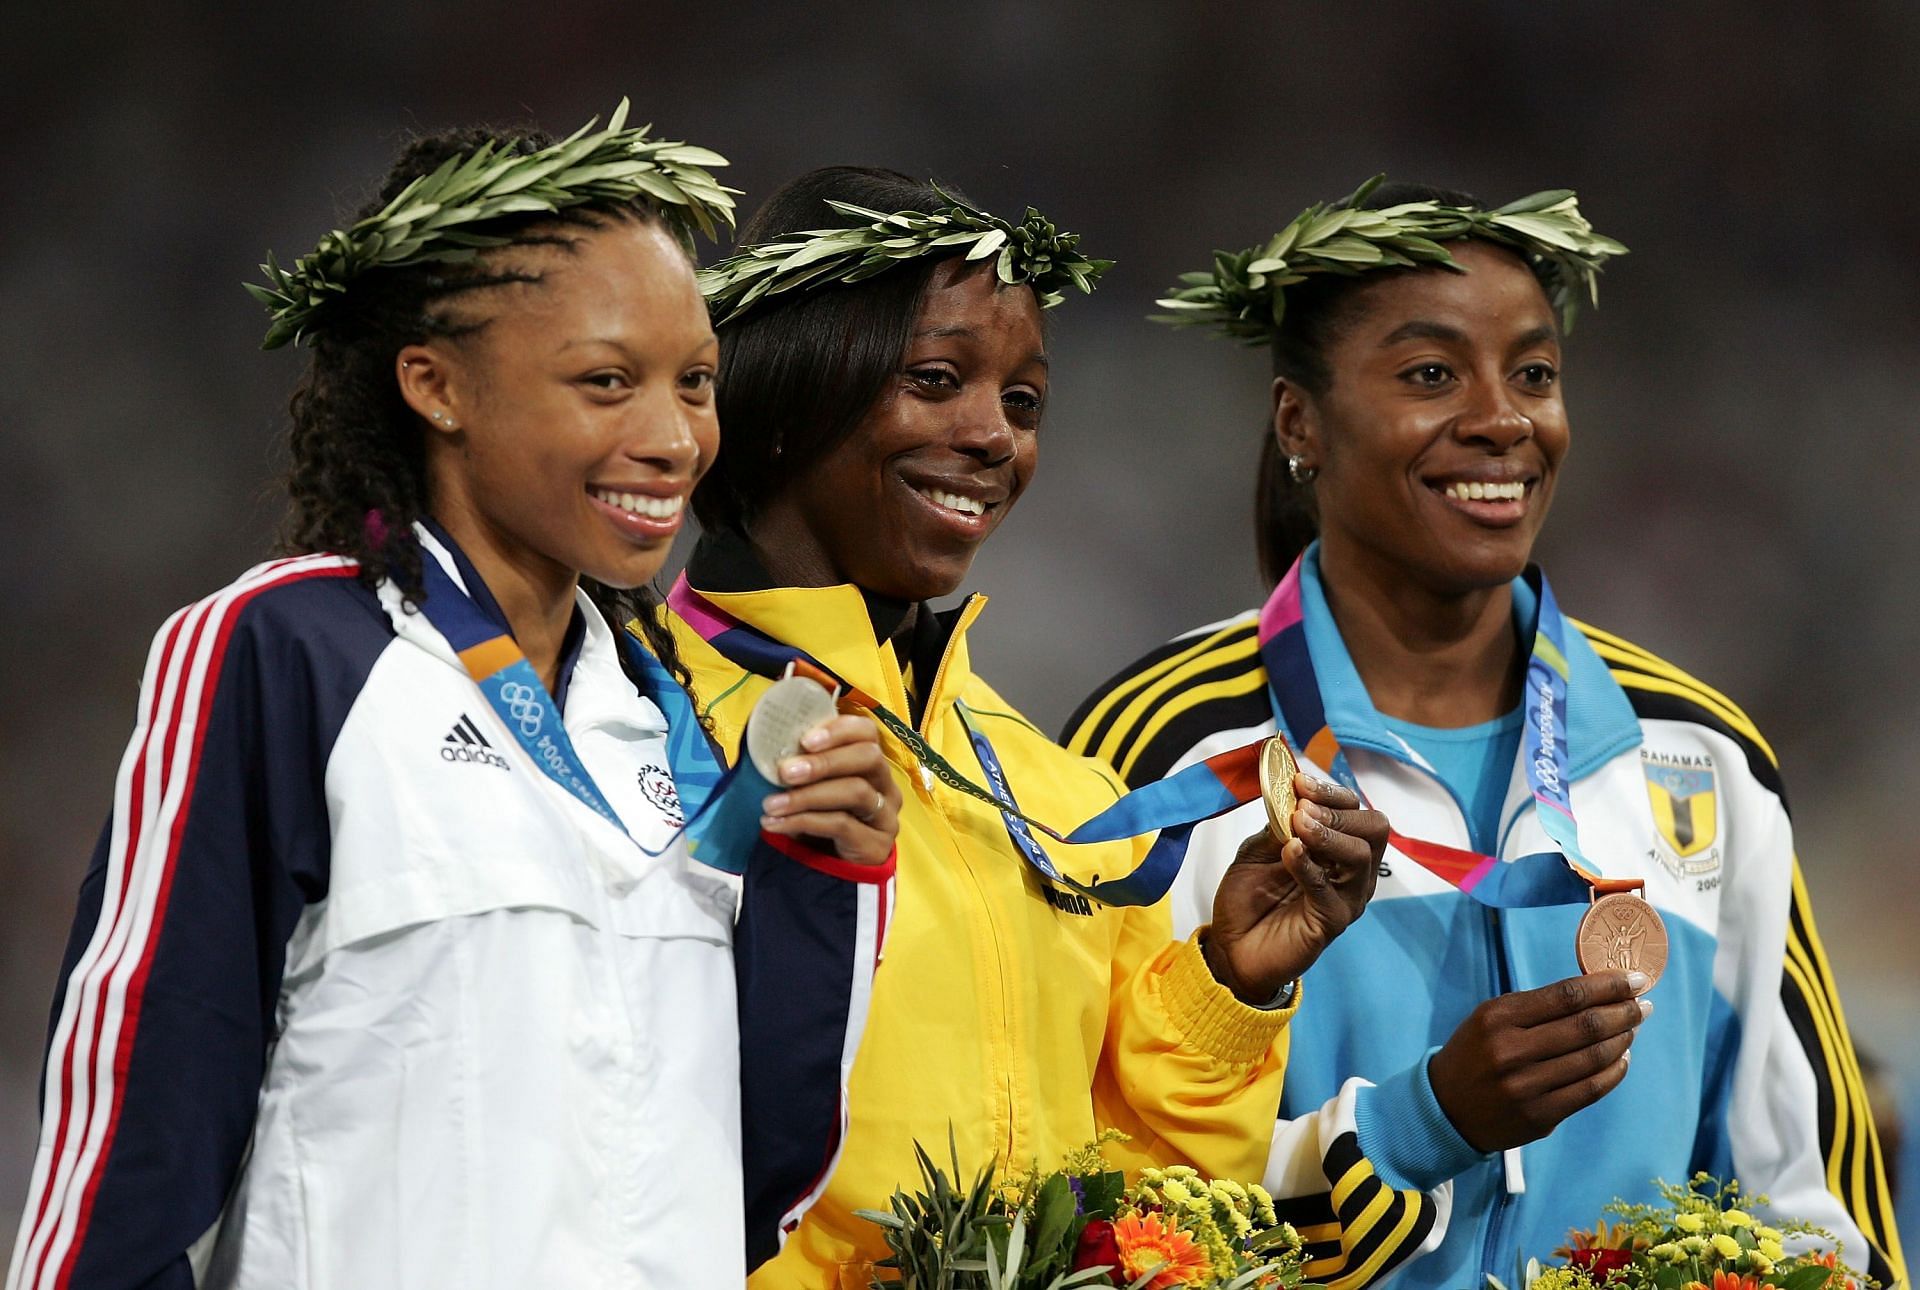 Felix (L) and Campbell (M) at the Womens 200m Medal Ceremony, Athens, 2004 (Image via Getty)